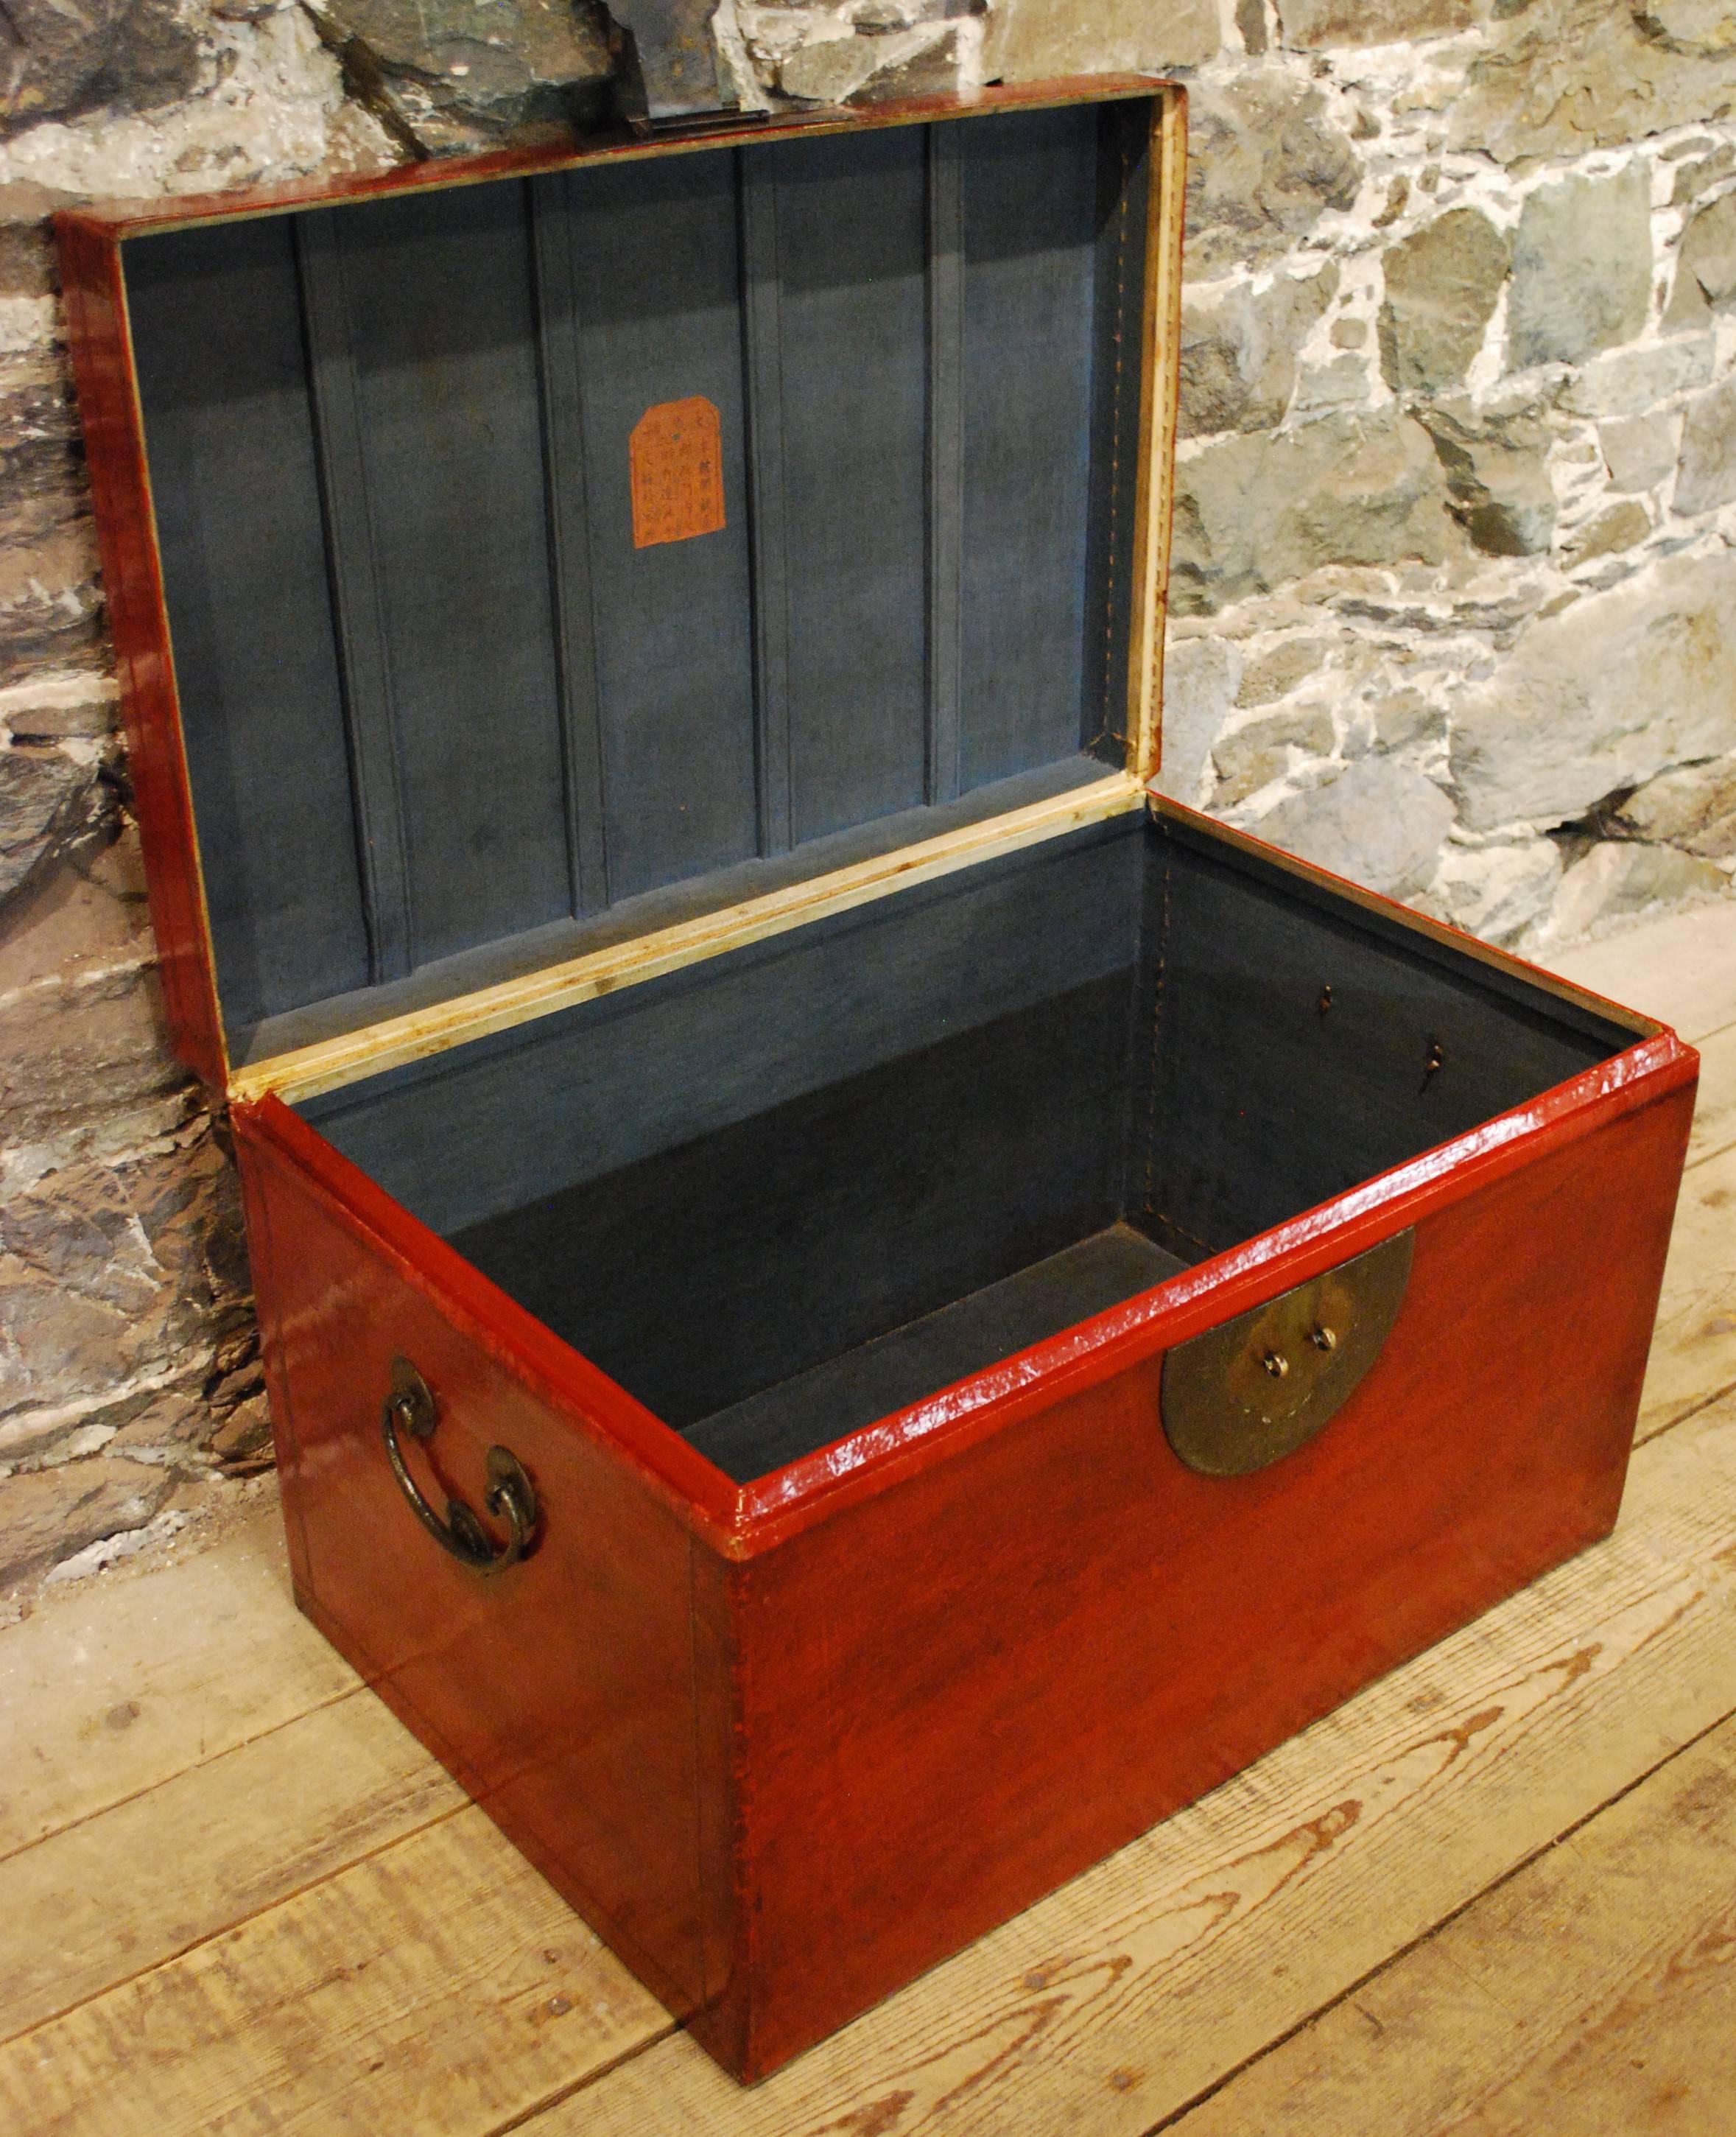 An antique red lacquer leather kimono trunk displaying hand-stitched red leather over camphor wood with multi-layers of rich red lacquers, a blue cloth lining, original hardware and showing the original maker's chop.